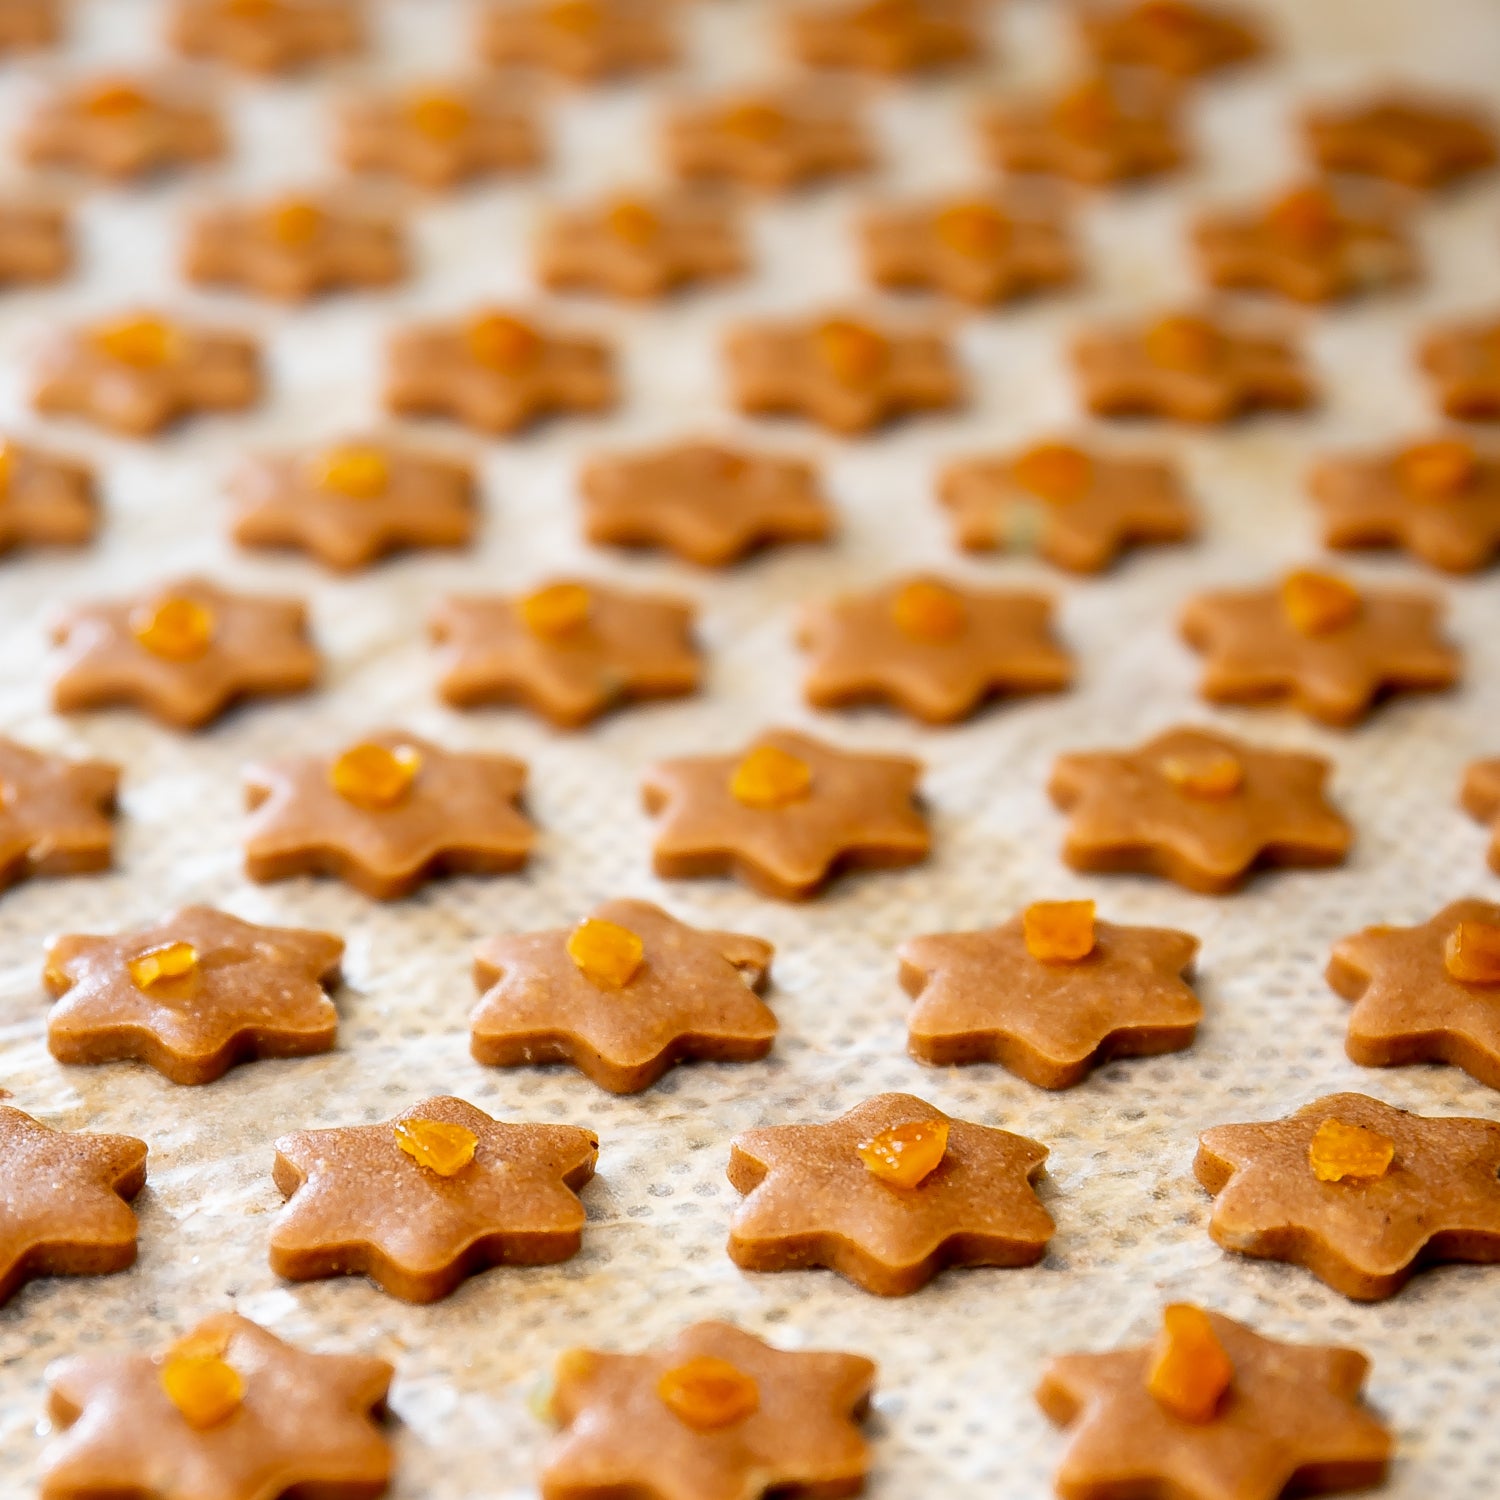 Aranzini Lebkuchen are small, delicate pieces of gingerbread, dried and candied orange peel in the dough, baked. 